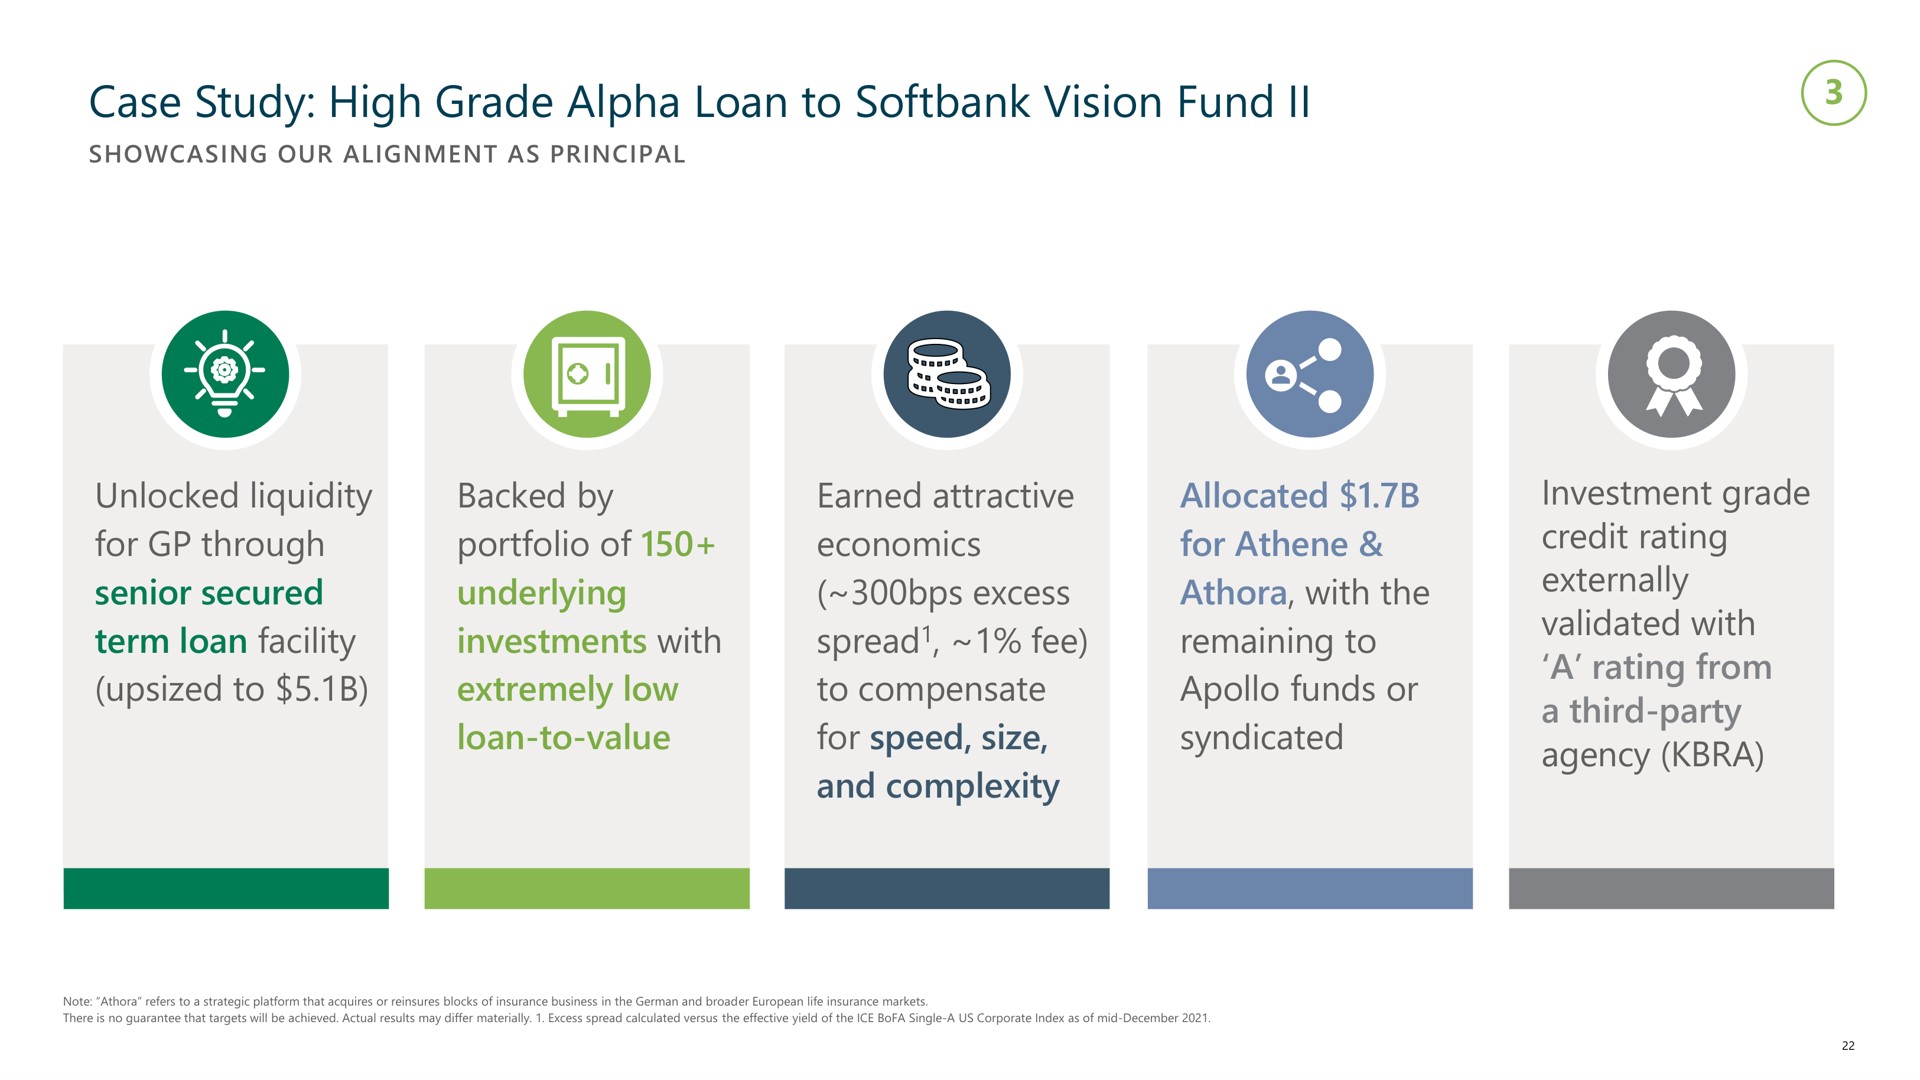 case study high grade alpha loan to vision fund unlocked liquidity for through senior secured term loan facility to backed by portfolio of underlying investments with extremely low loan to value earned attractive economics excess spread fee to compensate for speed size and complexity allocated for with the remaining to funds or syndicated investment grade credit rating externally validated with a rating from a third party agency spread | Apollo Global Management